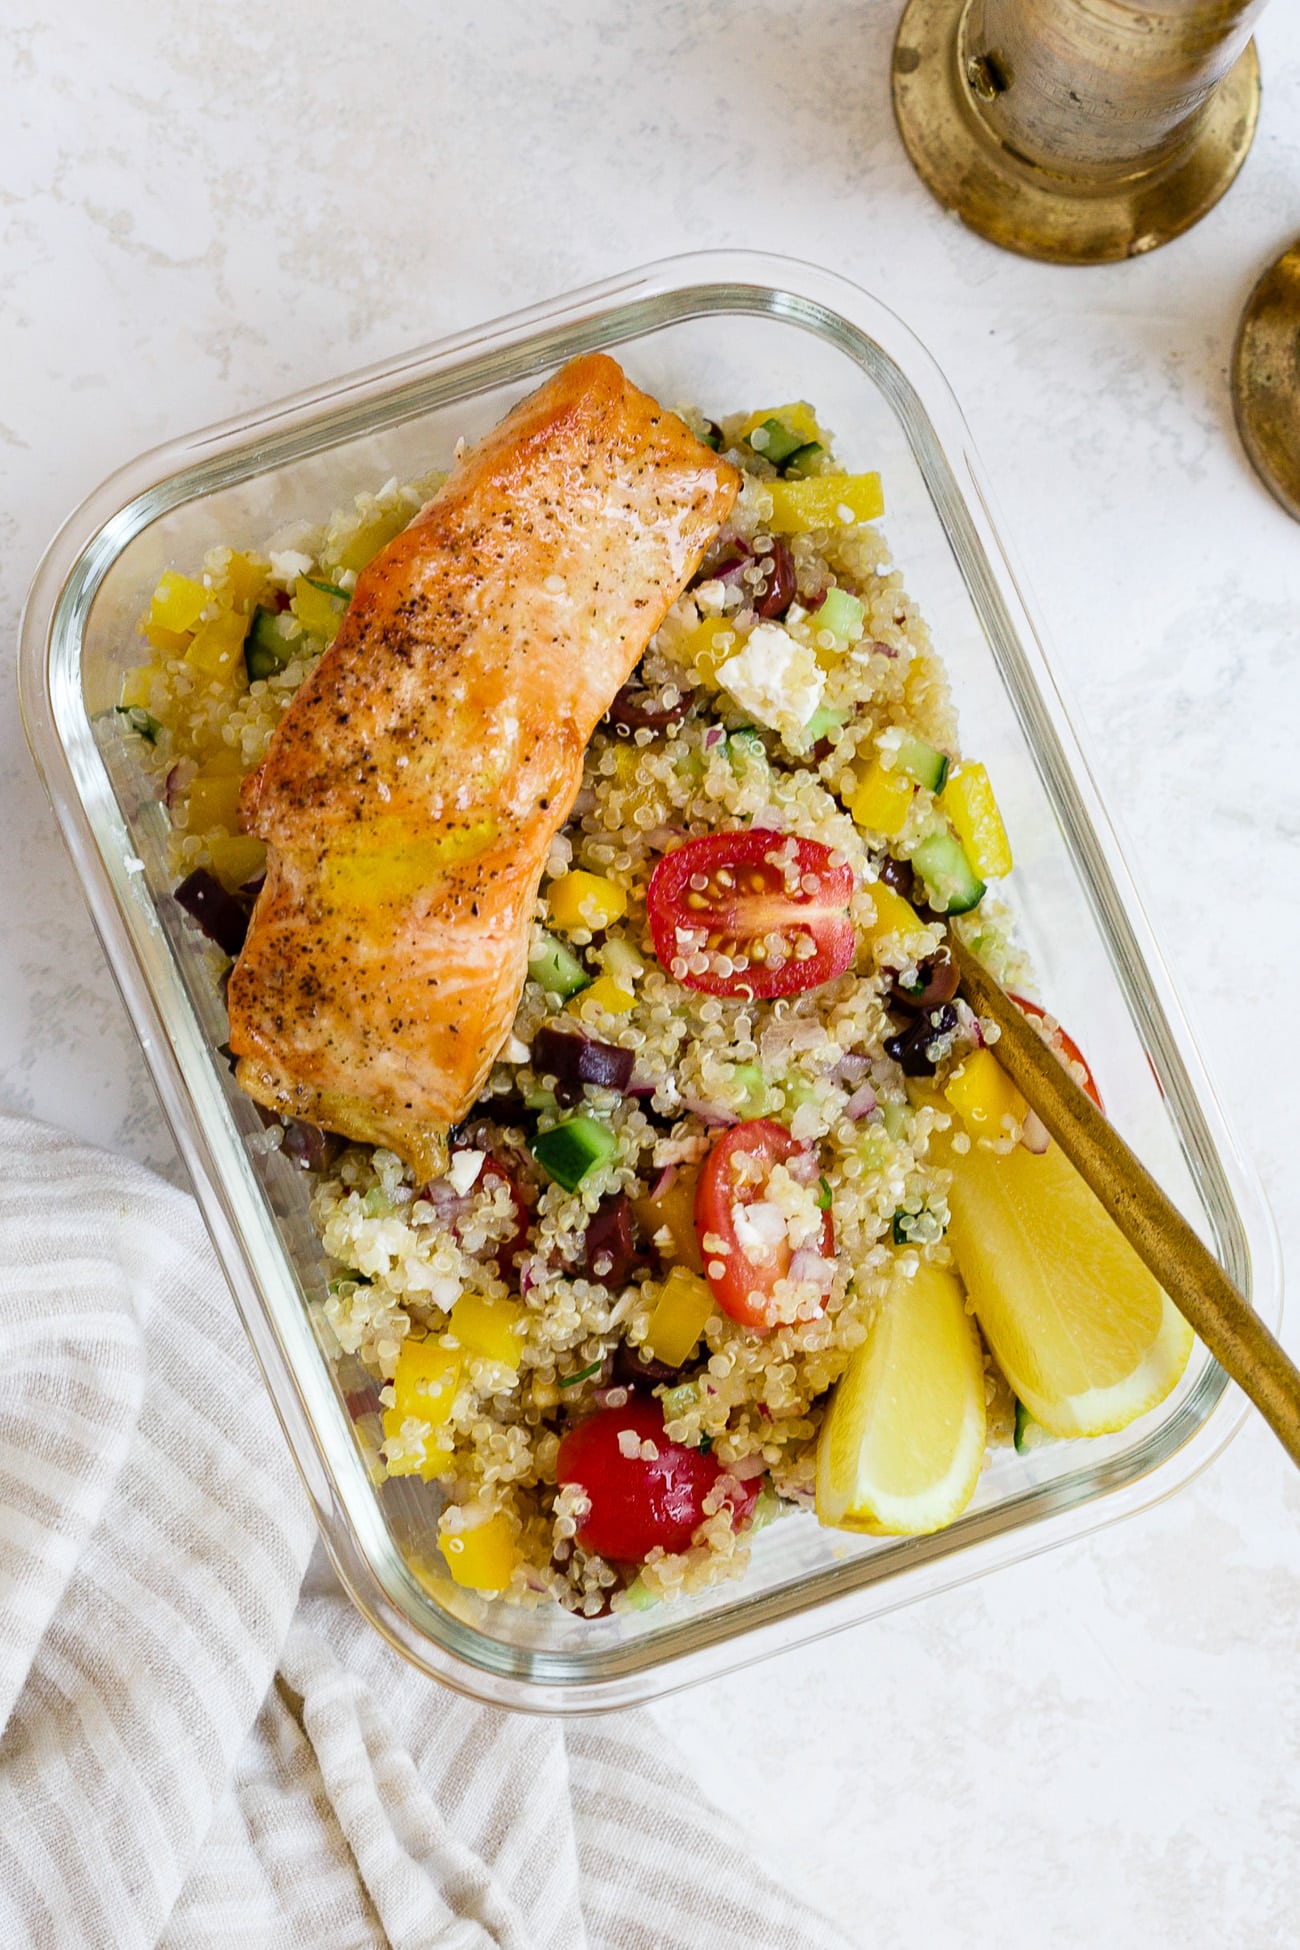 Mediterranean quinoa salad with salmon in a meal-prep container.